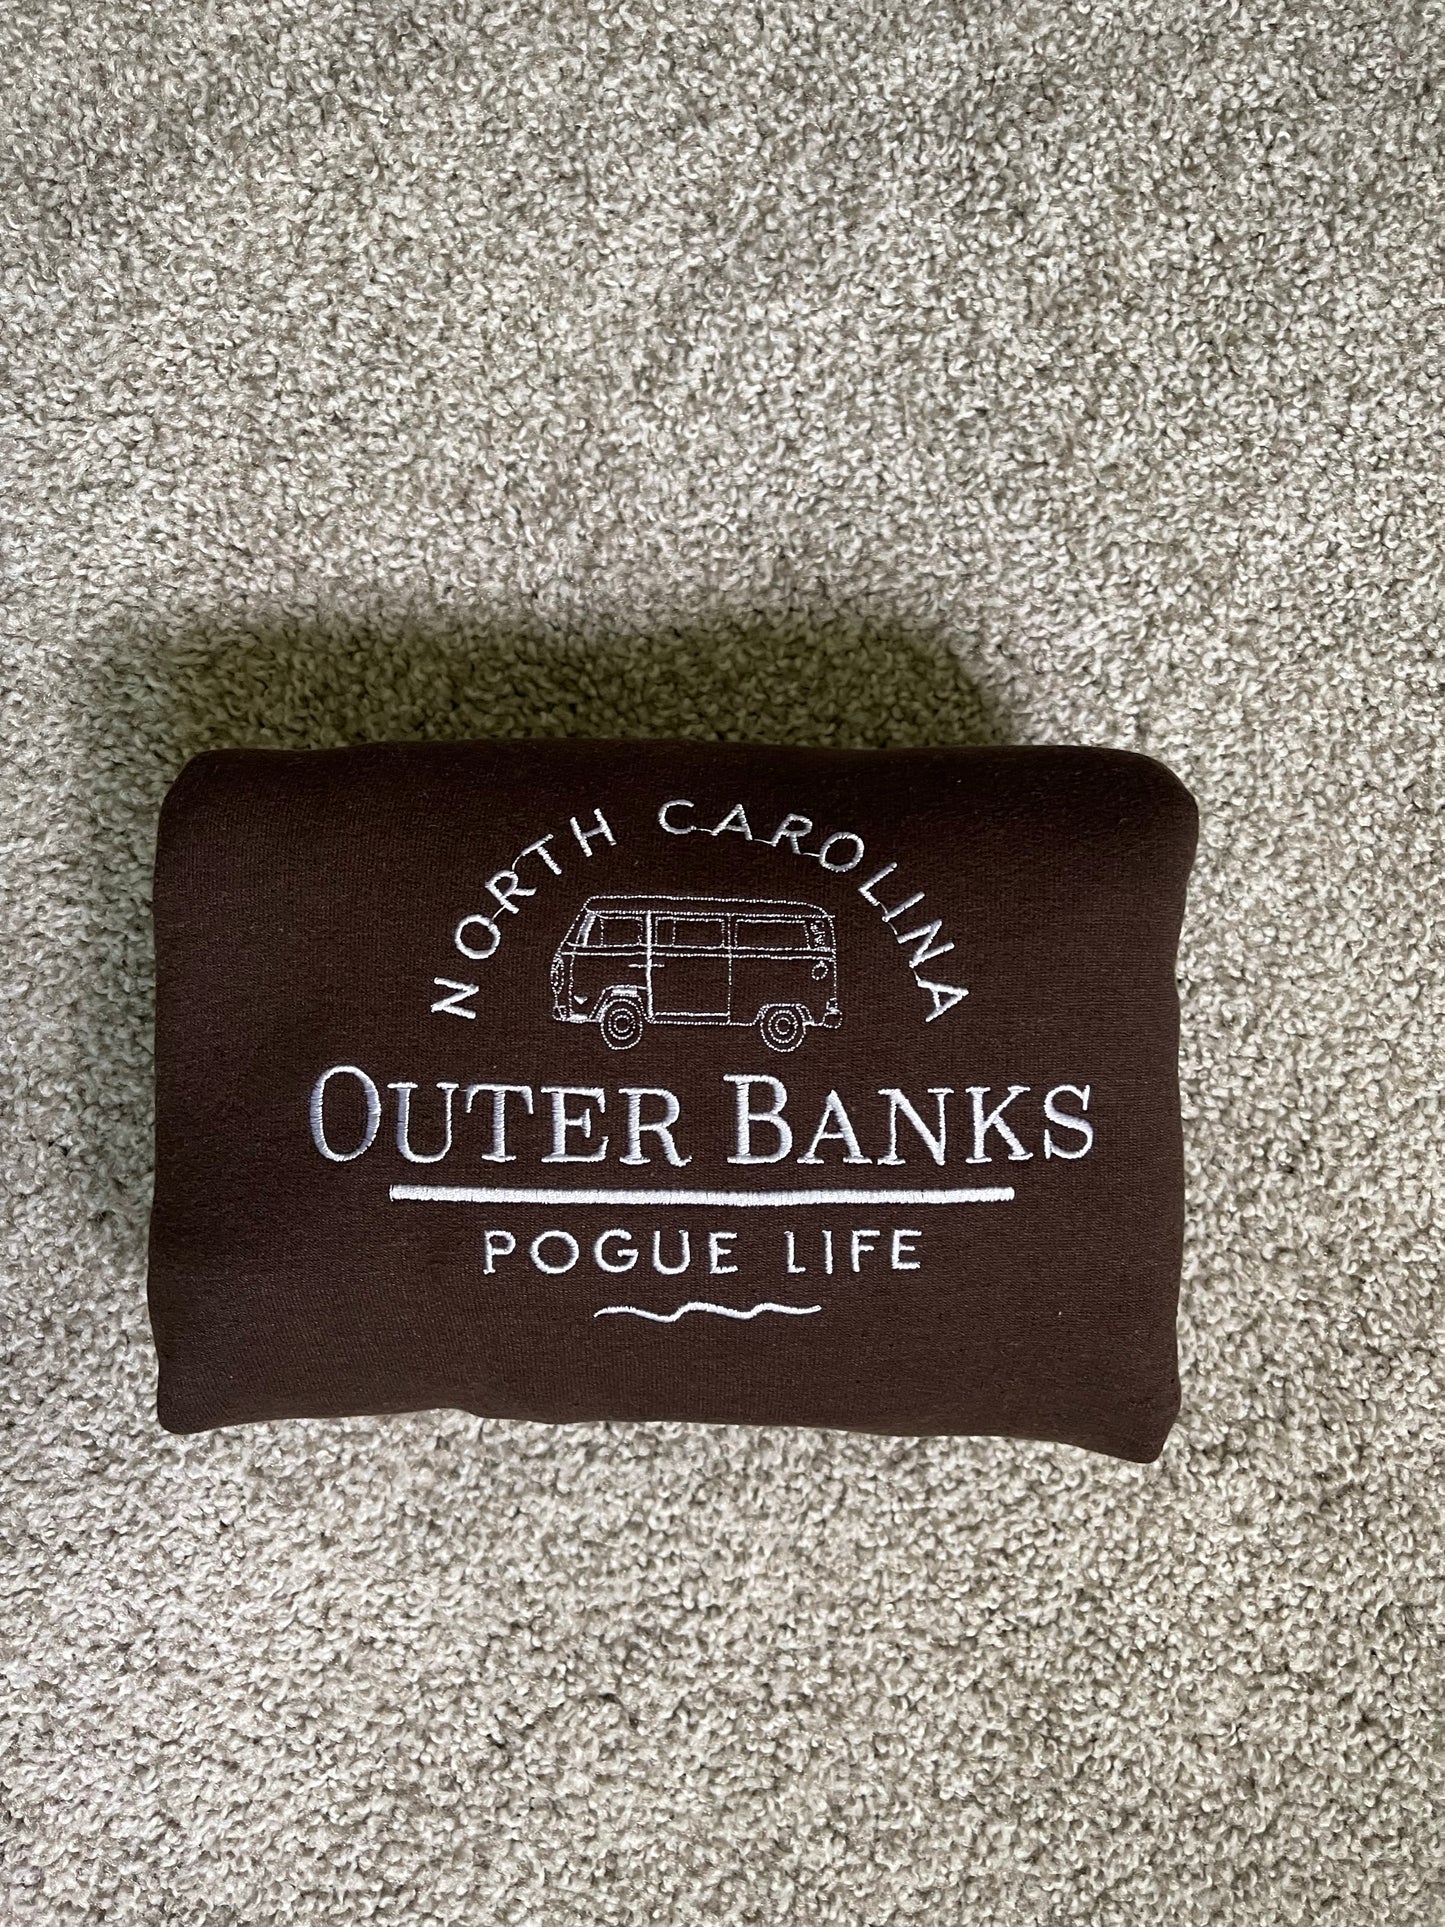 Outer Banks embroidered sweatshirt